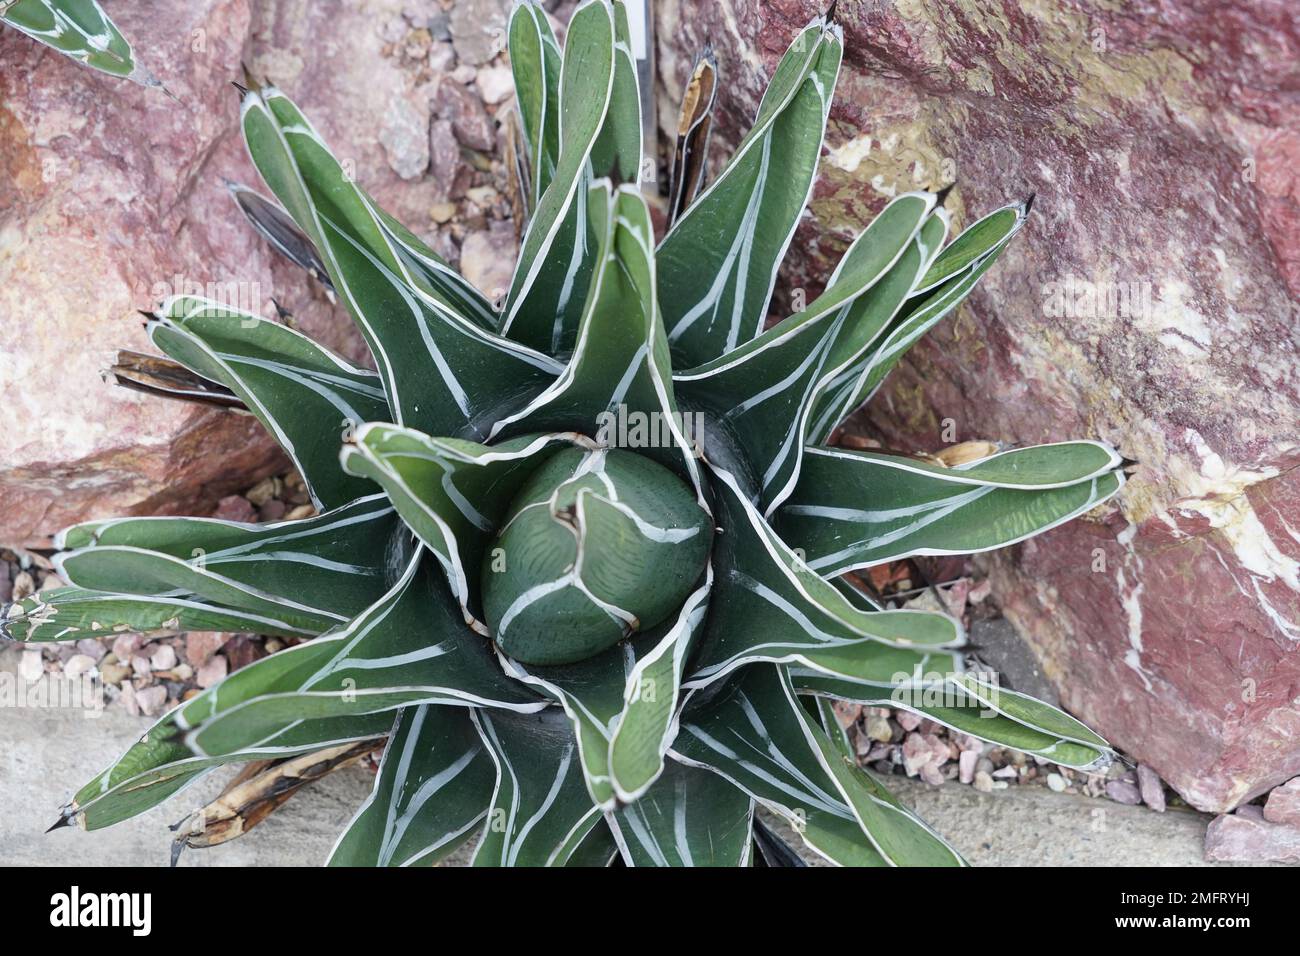 Young agave plant, in Latin it is called Agave victoriae-regina. Stock Photo